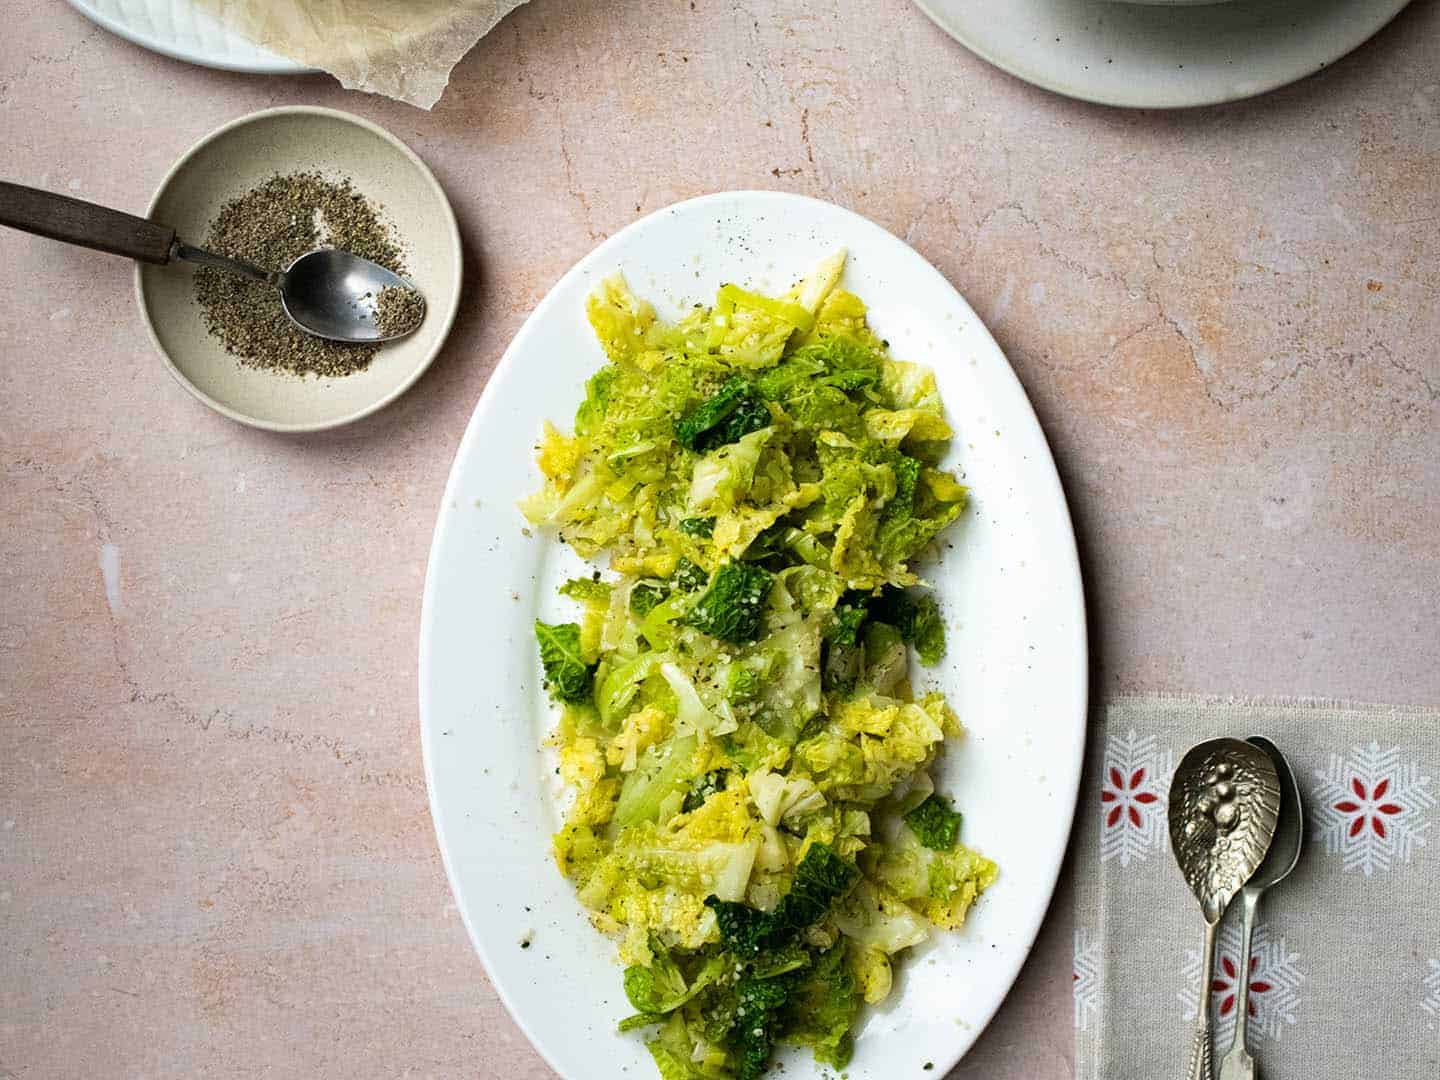 Landscape image showing cabbage and leeks on a white oval plate with spoons and black pepper in a dish